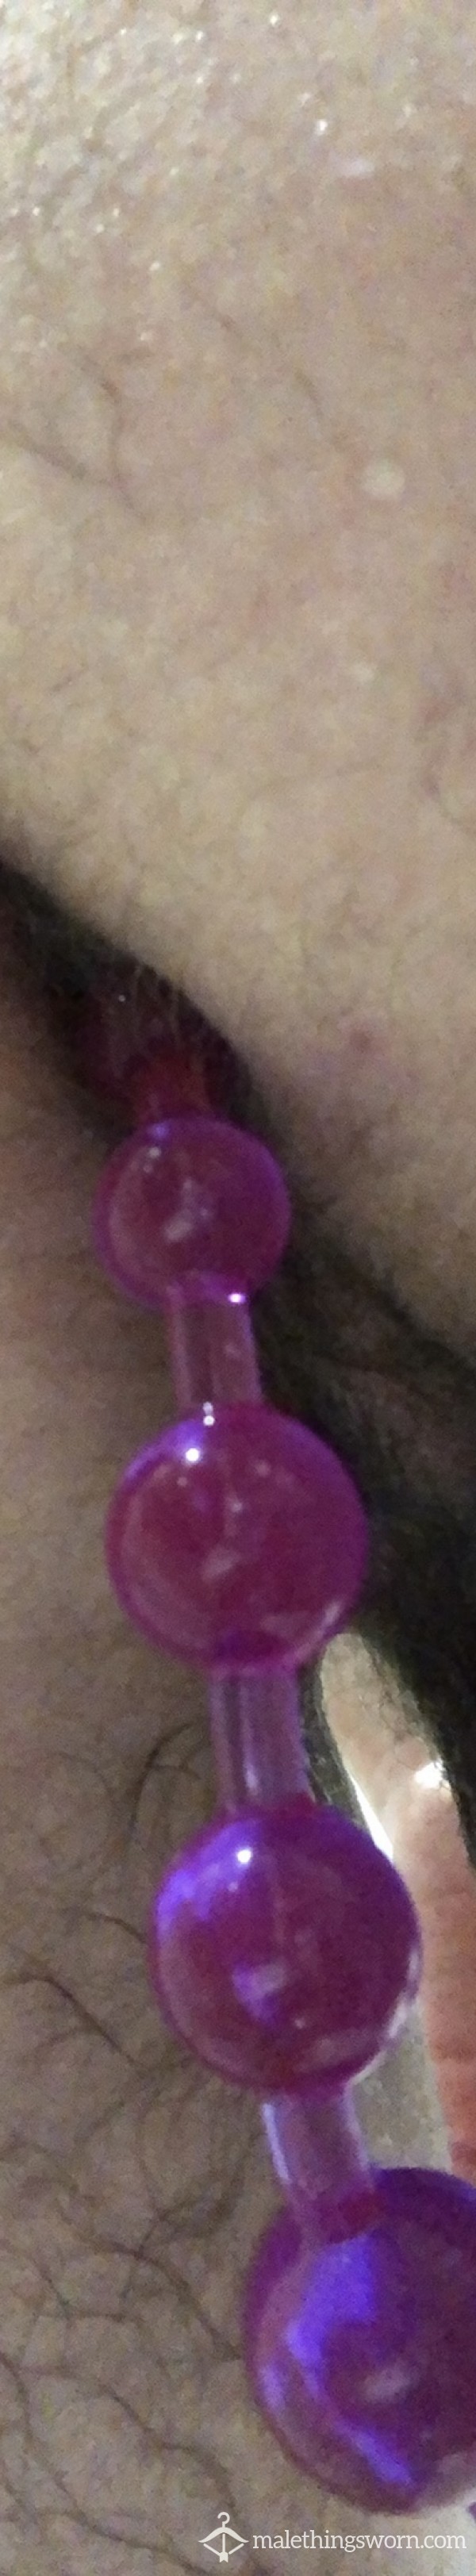 Pictures Of Anal Beads Inside Me